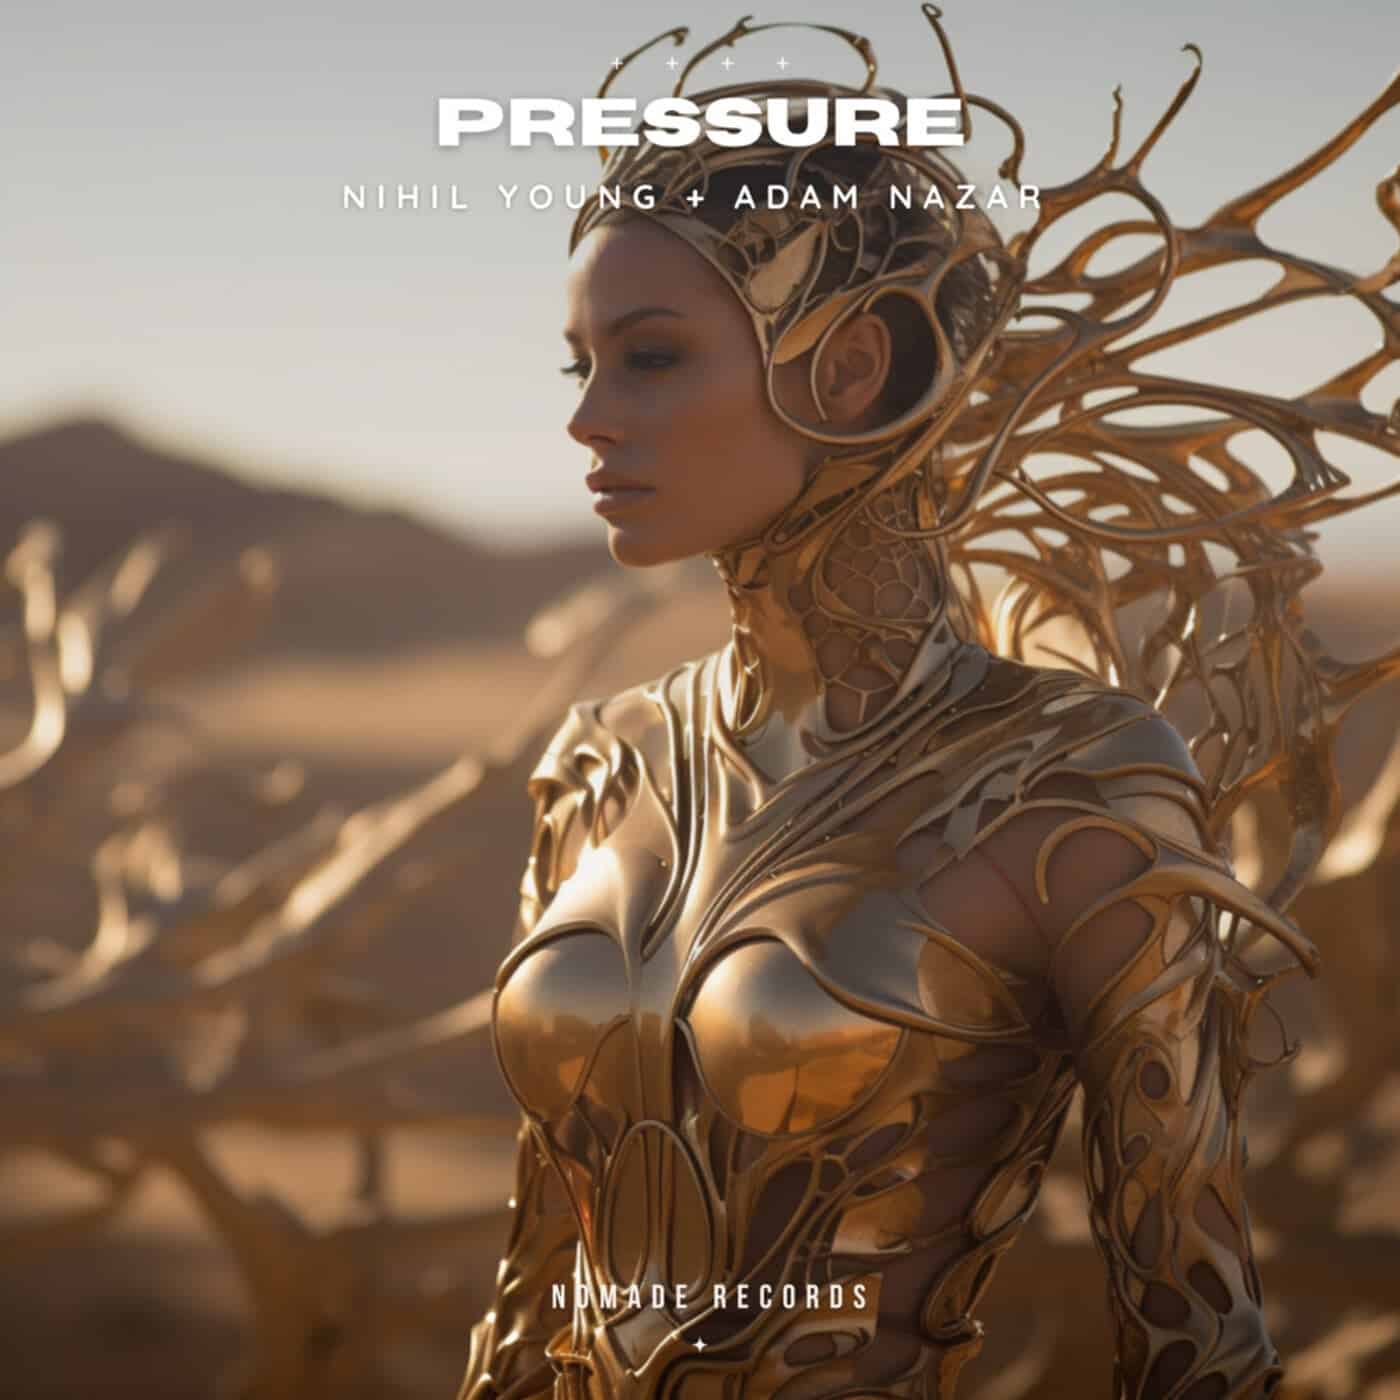 image cover: Nihil Young, Adam Nazar - Pressure on Nomade Records (DE)